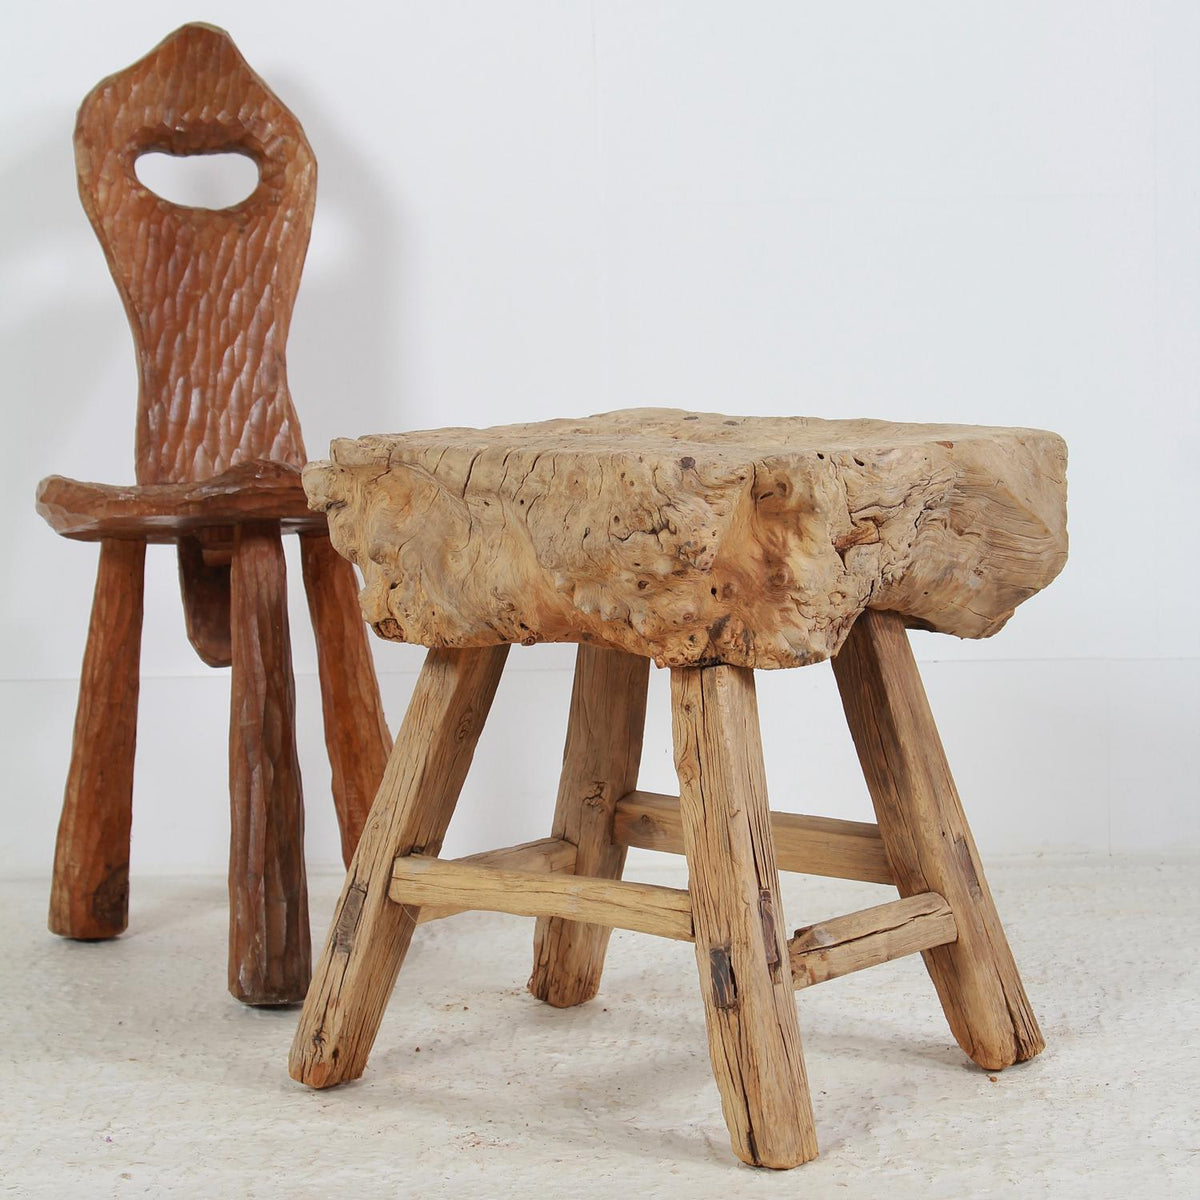 Charming  Primitive Gnarly Tree Trunk Side Table